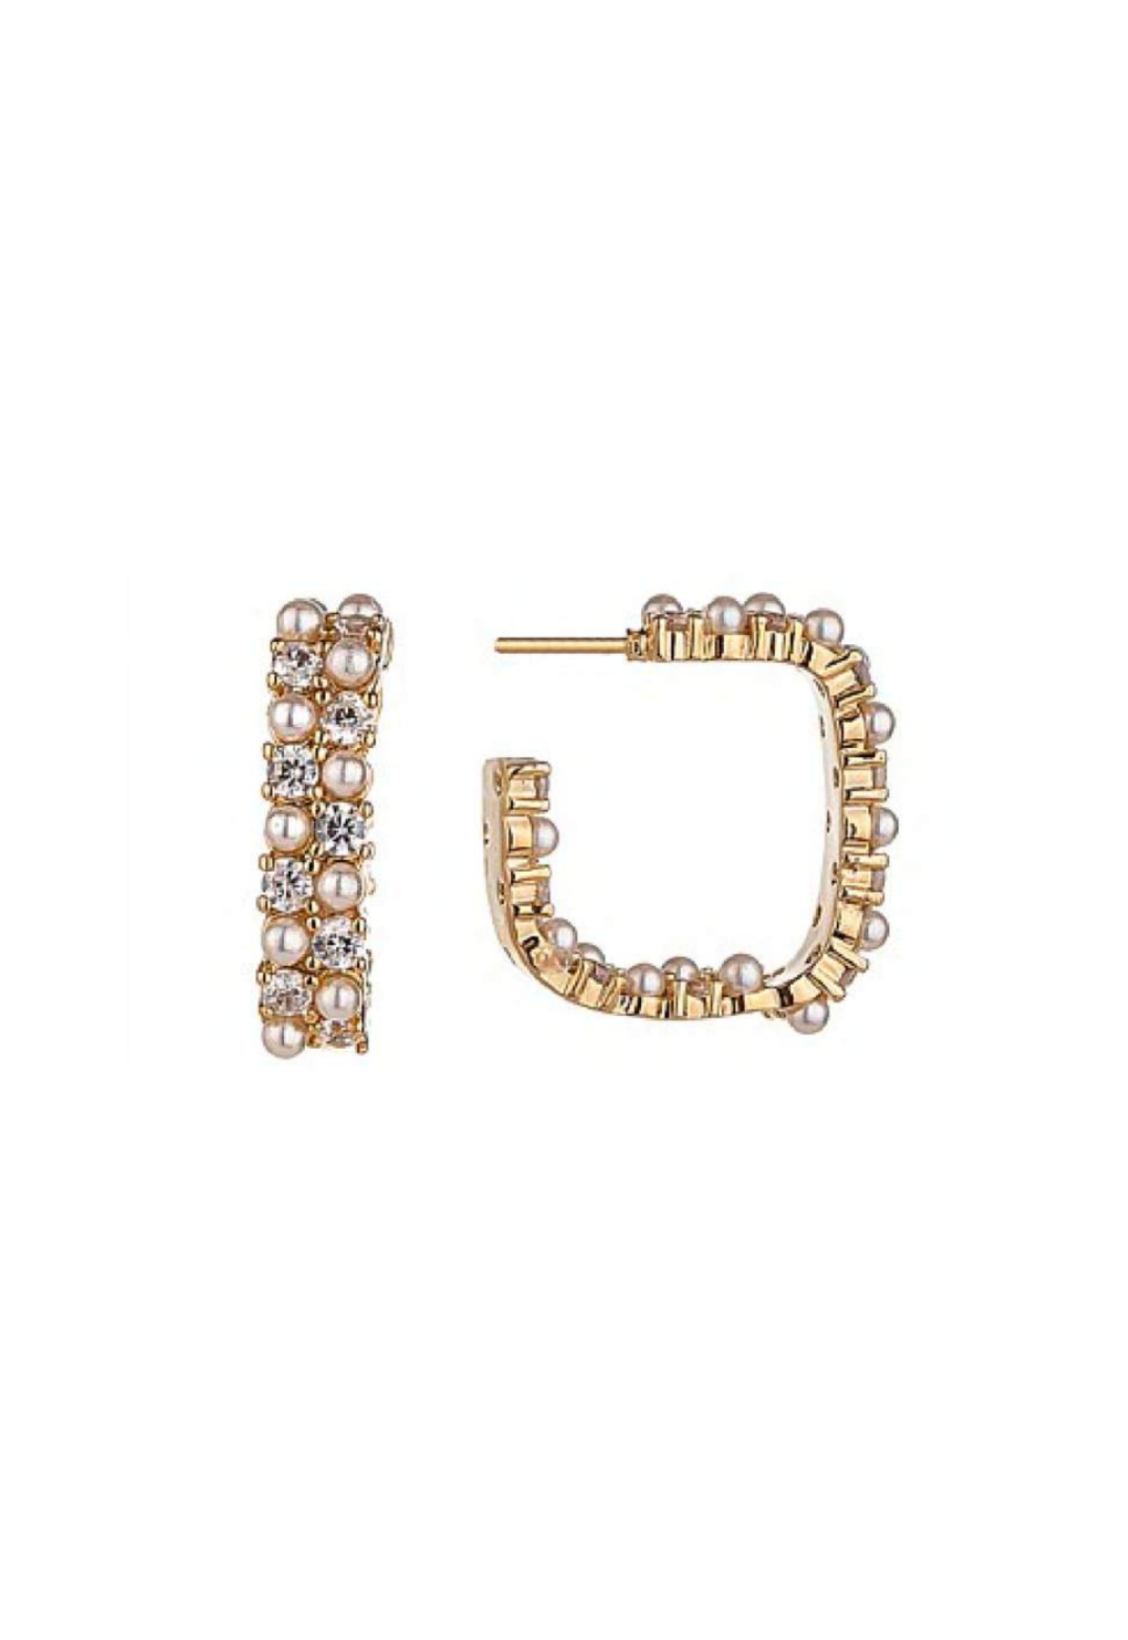 GREGORY LADNER SQUARE HOOP EARRING W/ CZ & MICRO PEARL - GOLD